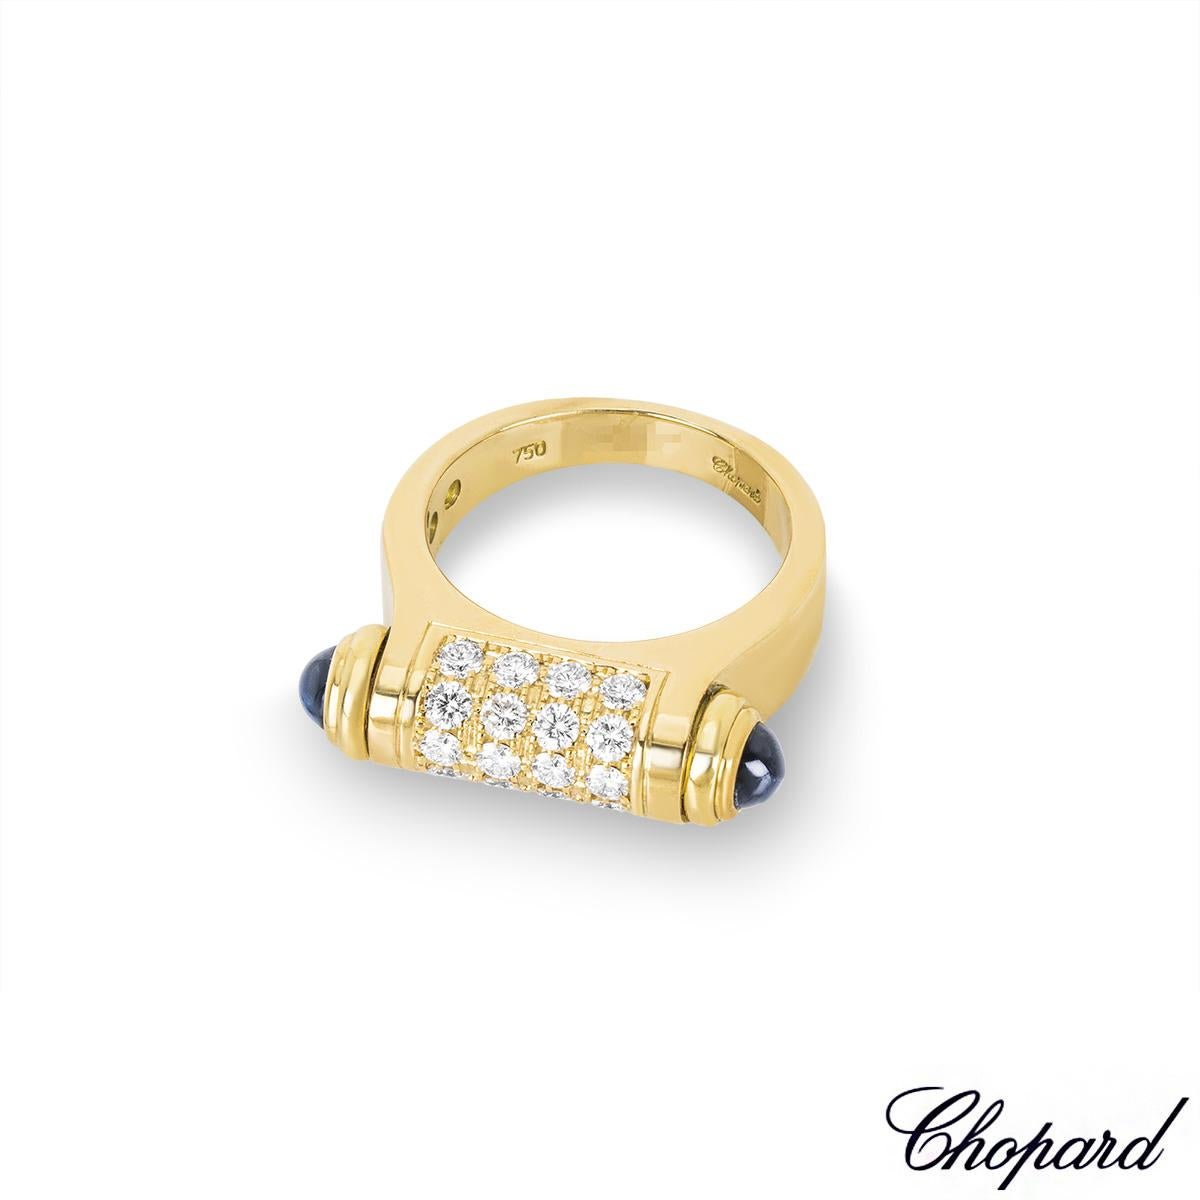 Chopard Limted Edition Diamond Set Imperiale Ring 823255-0111 In Good Condition For Sale In London, GB